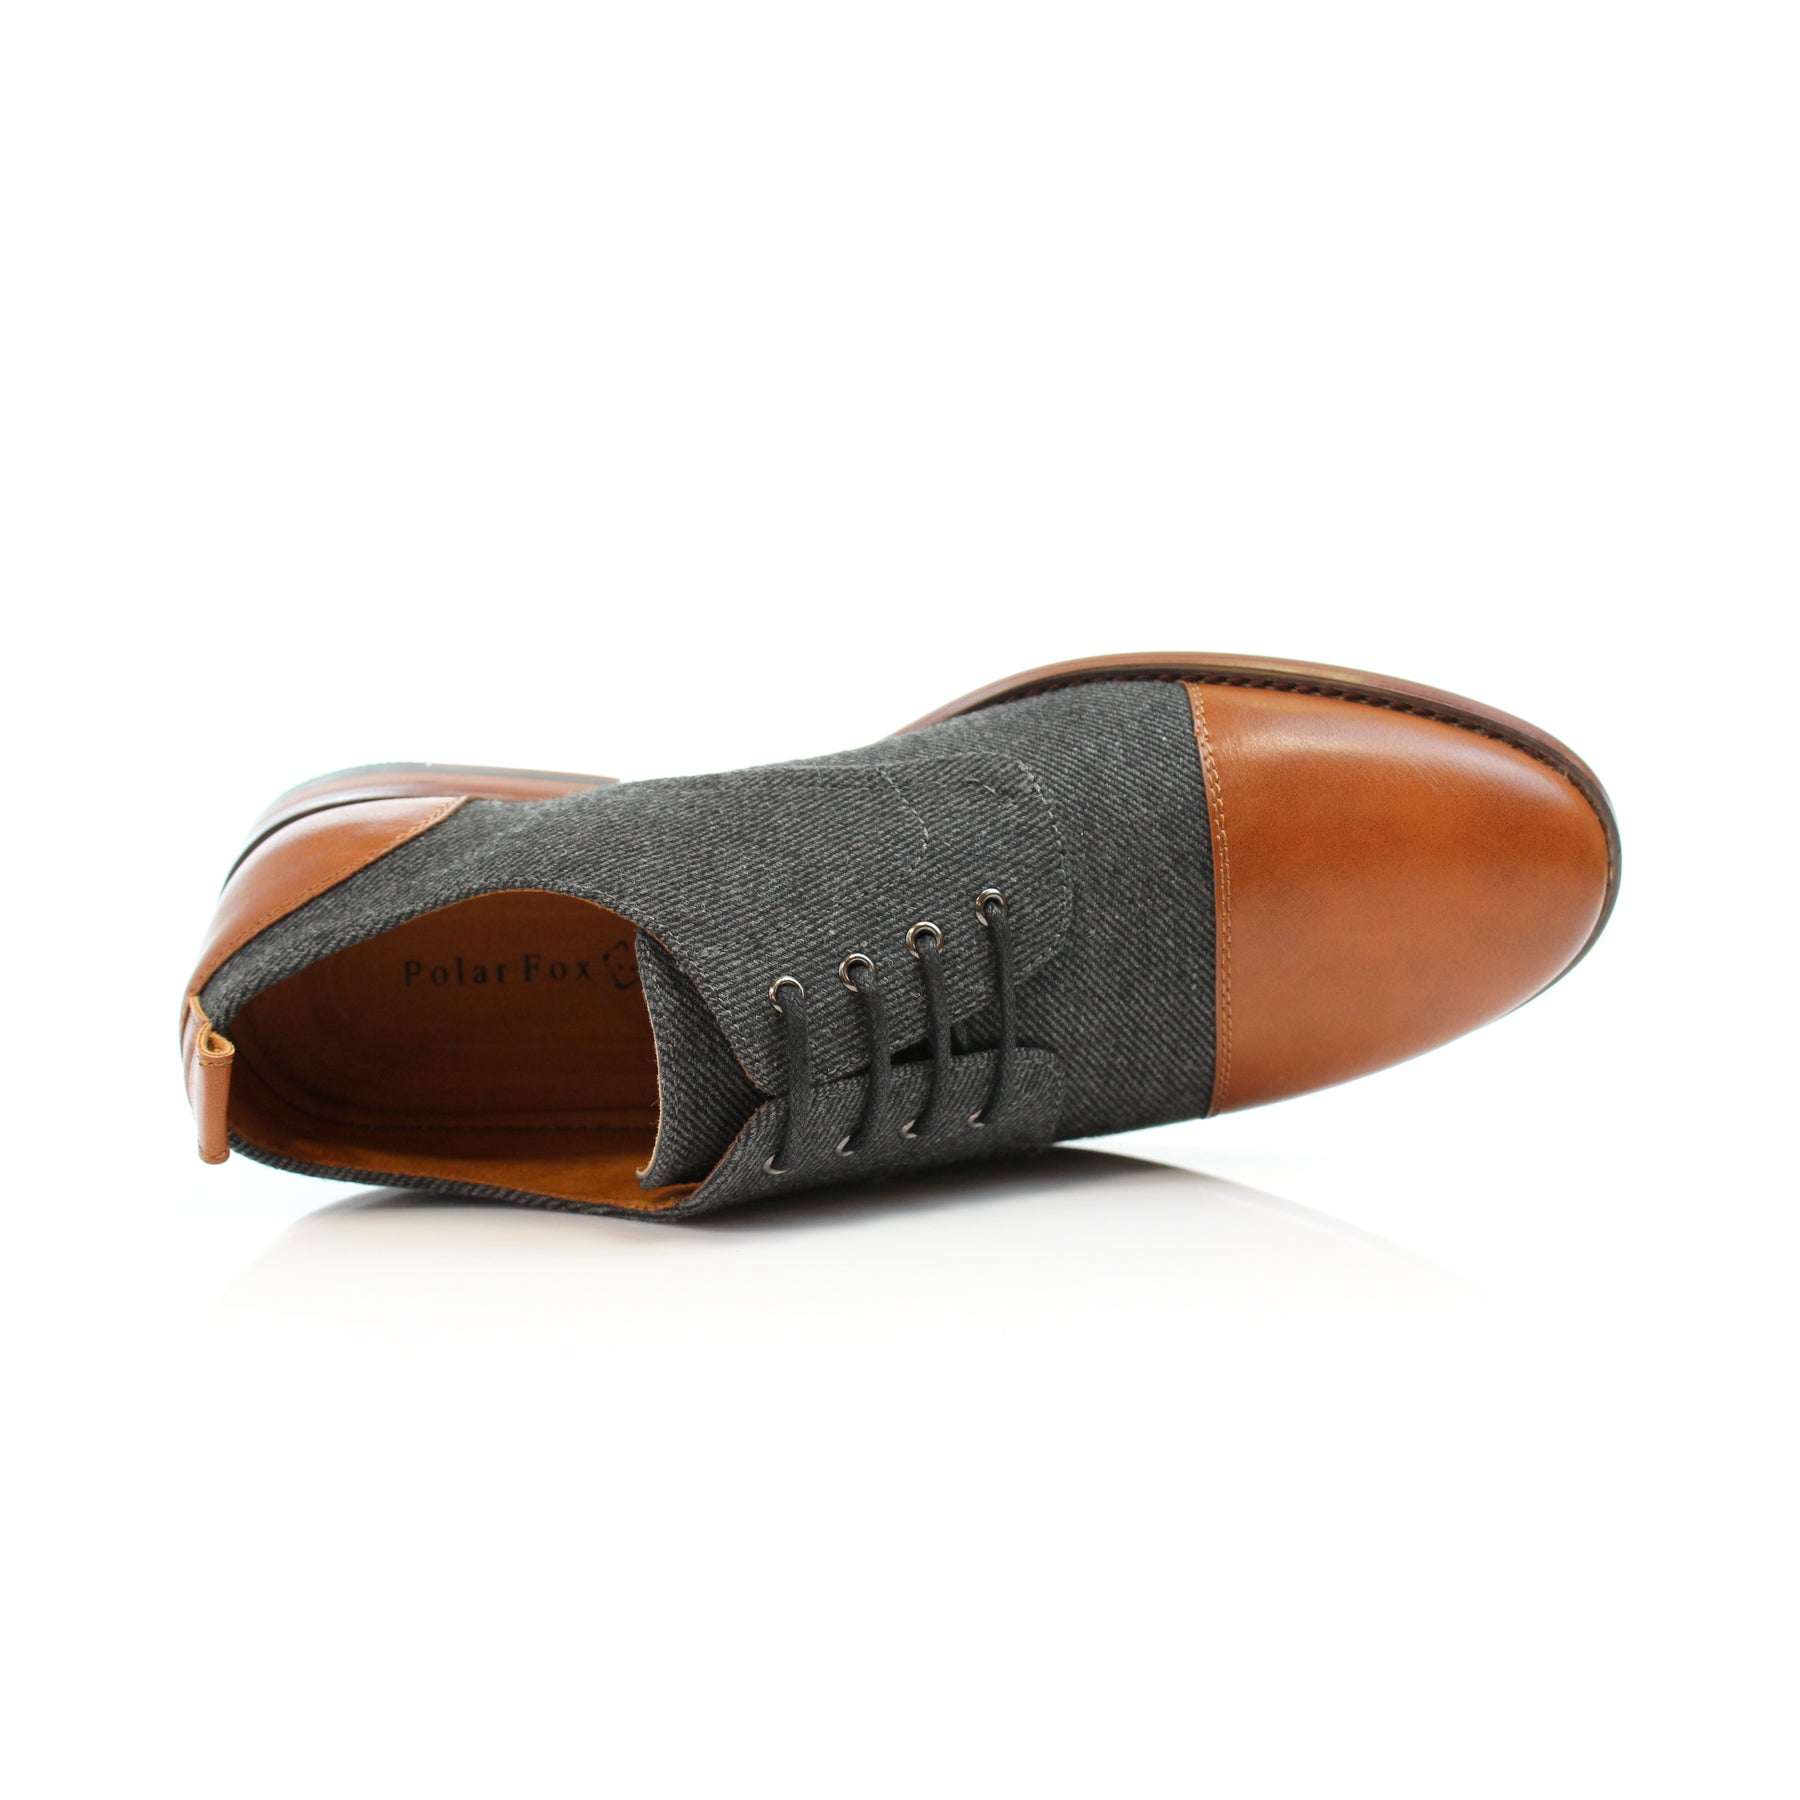 Duo-textured Woolen Derby Dress Shoes | Clifford by Polar Fox | Conal Footwear | Top-Down Angle View